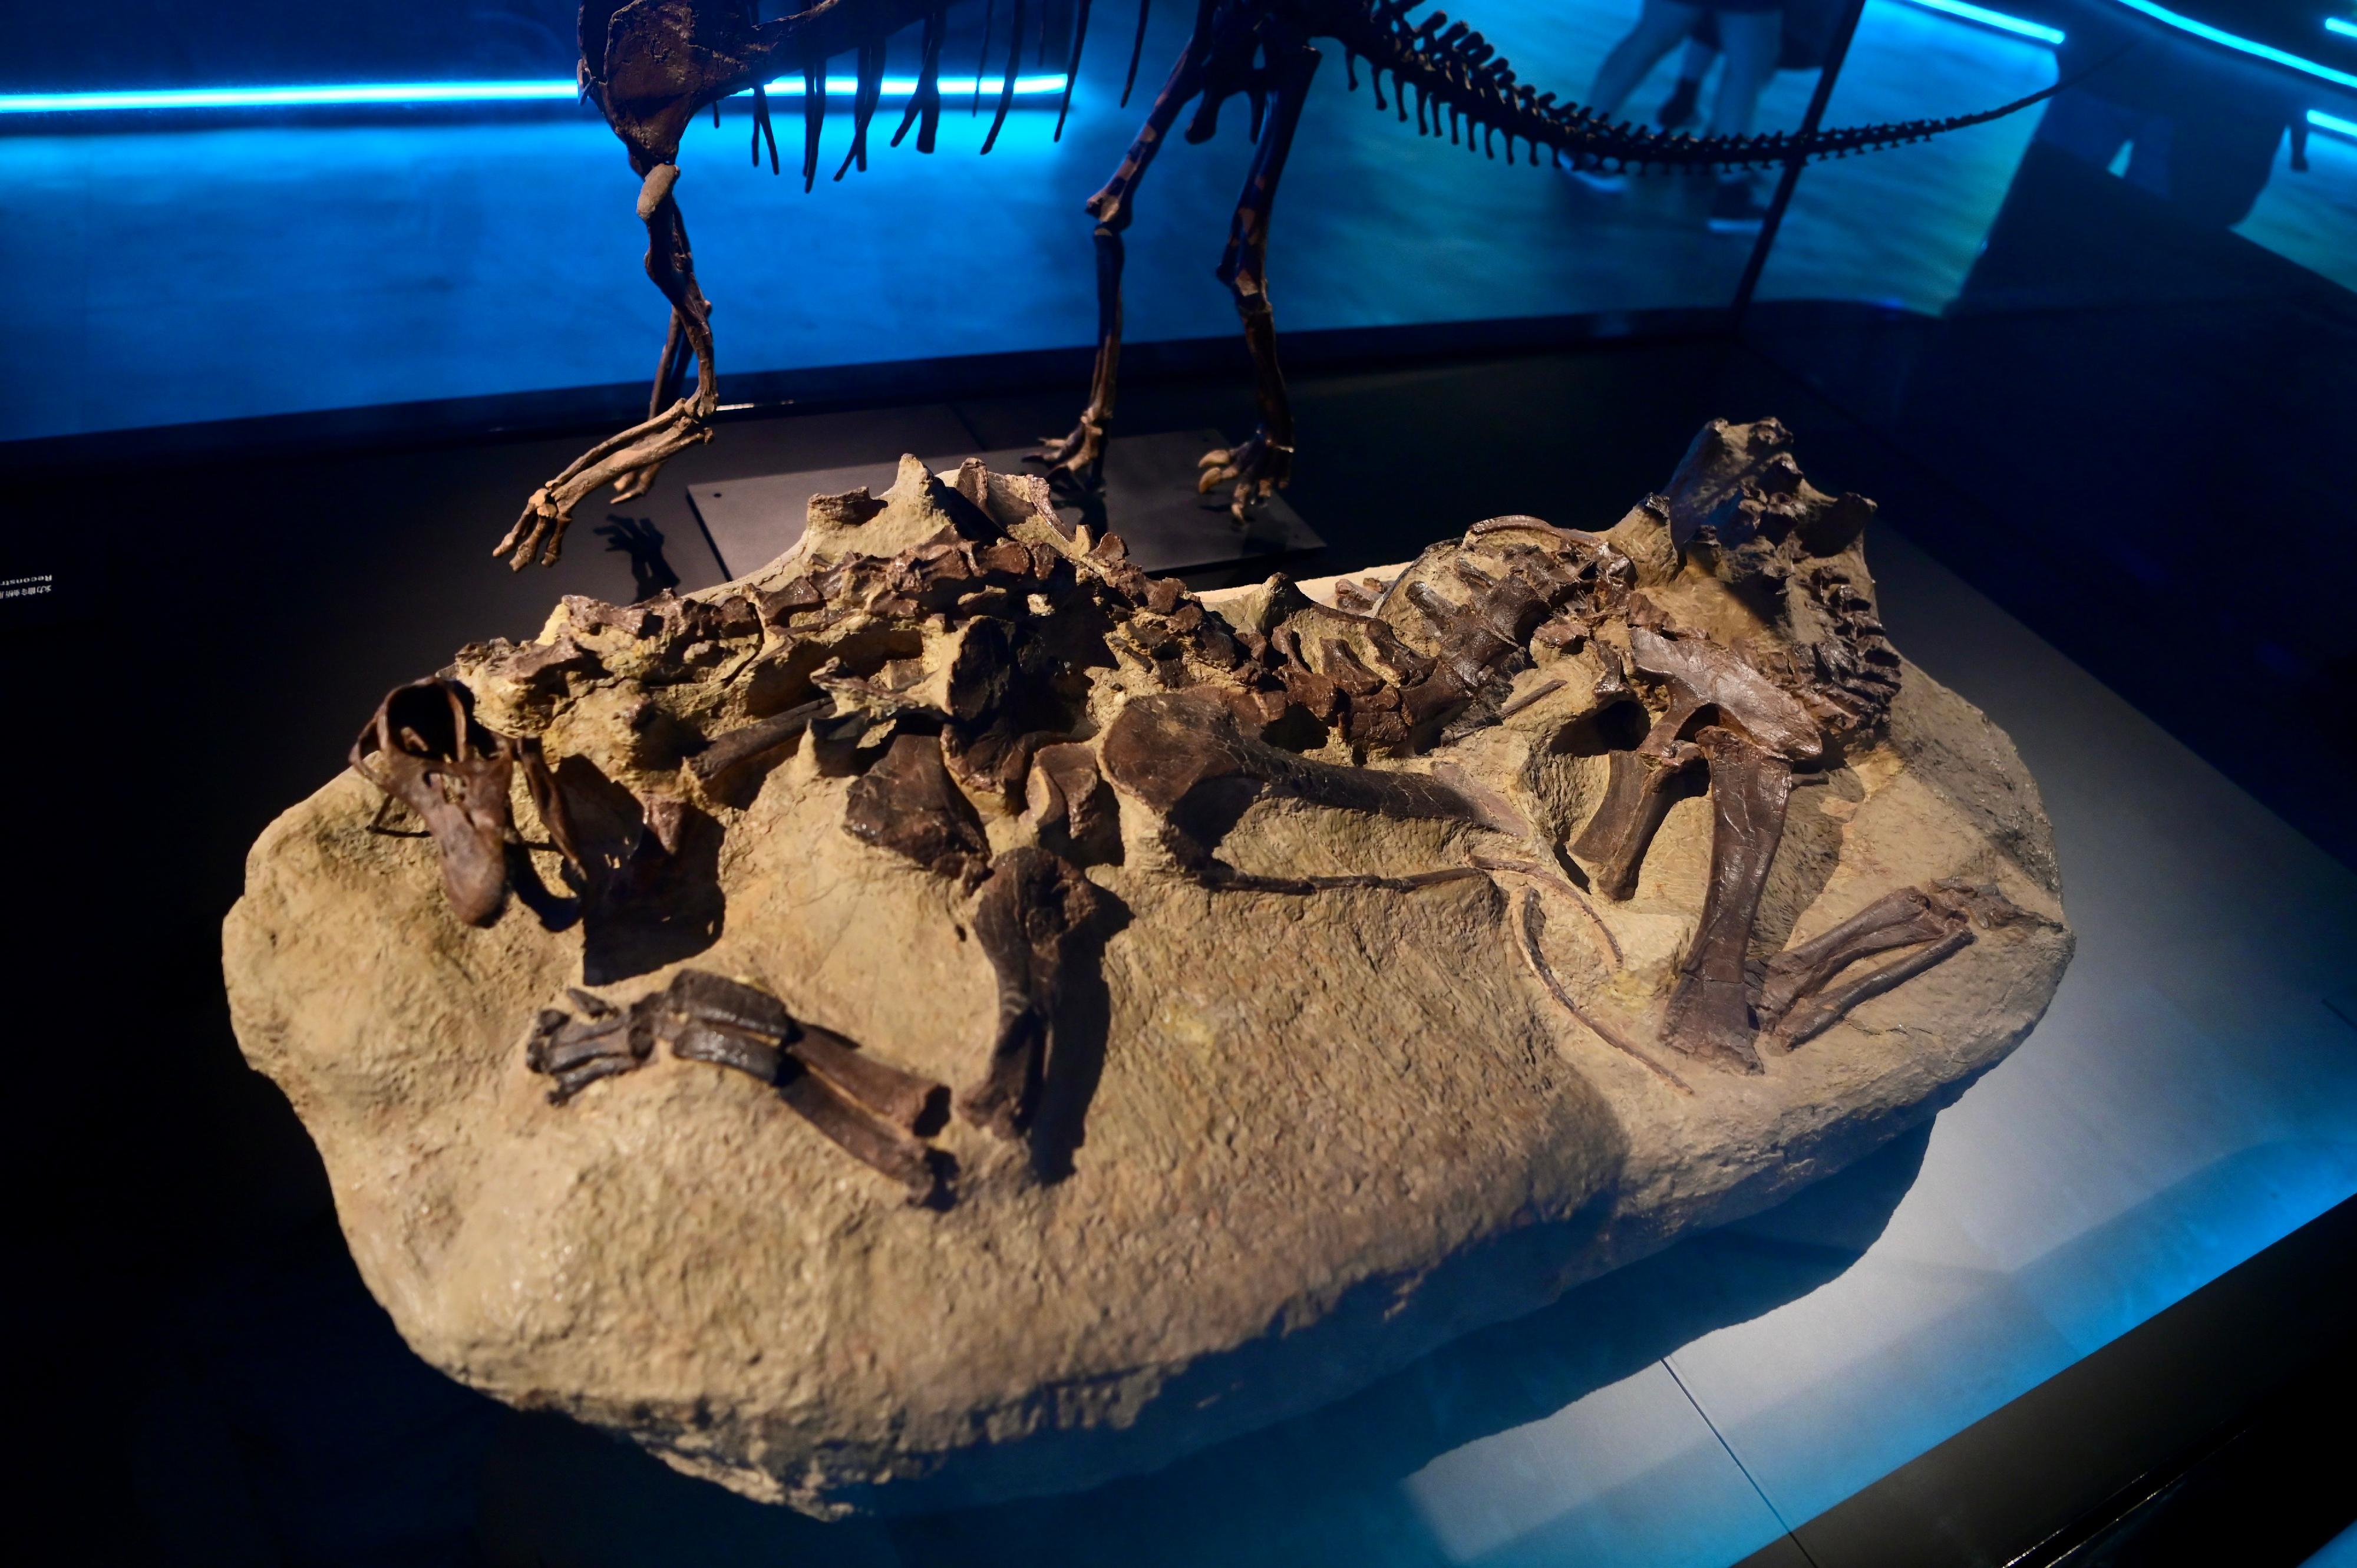 The Hong Kong Science Museum will stage a large-scale dinosaur exhibition, "The Hong Kong Jockey Club Series: The Big Eight - Dinosaur Revelation", from July 8 (Friday). Picture shows a baby sauropod displayed in its original buried state.